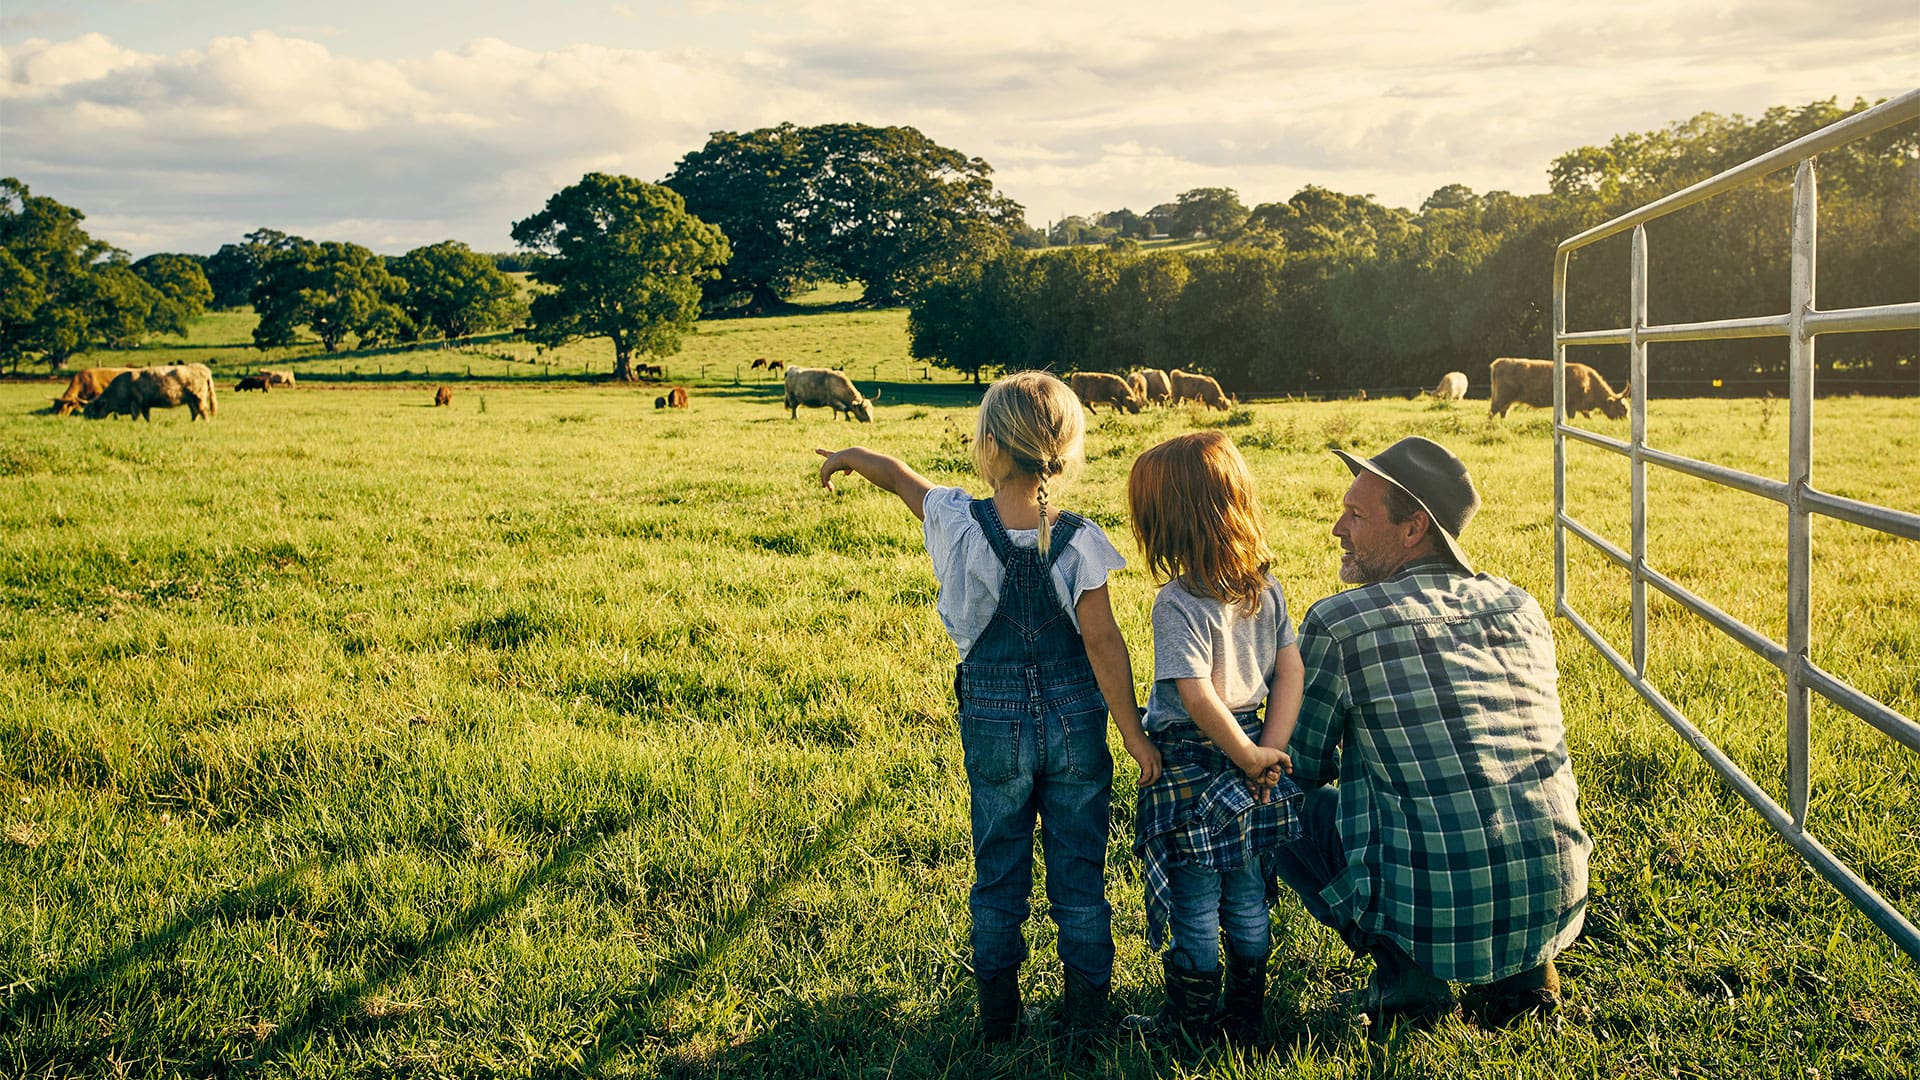 A father squats by a paddock gate beside his two young daughters who are pointing towards cattle in the distance.